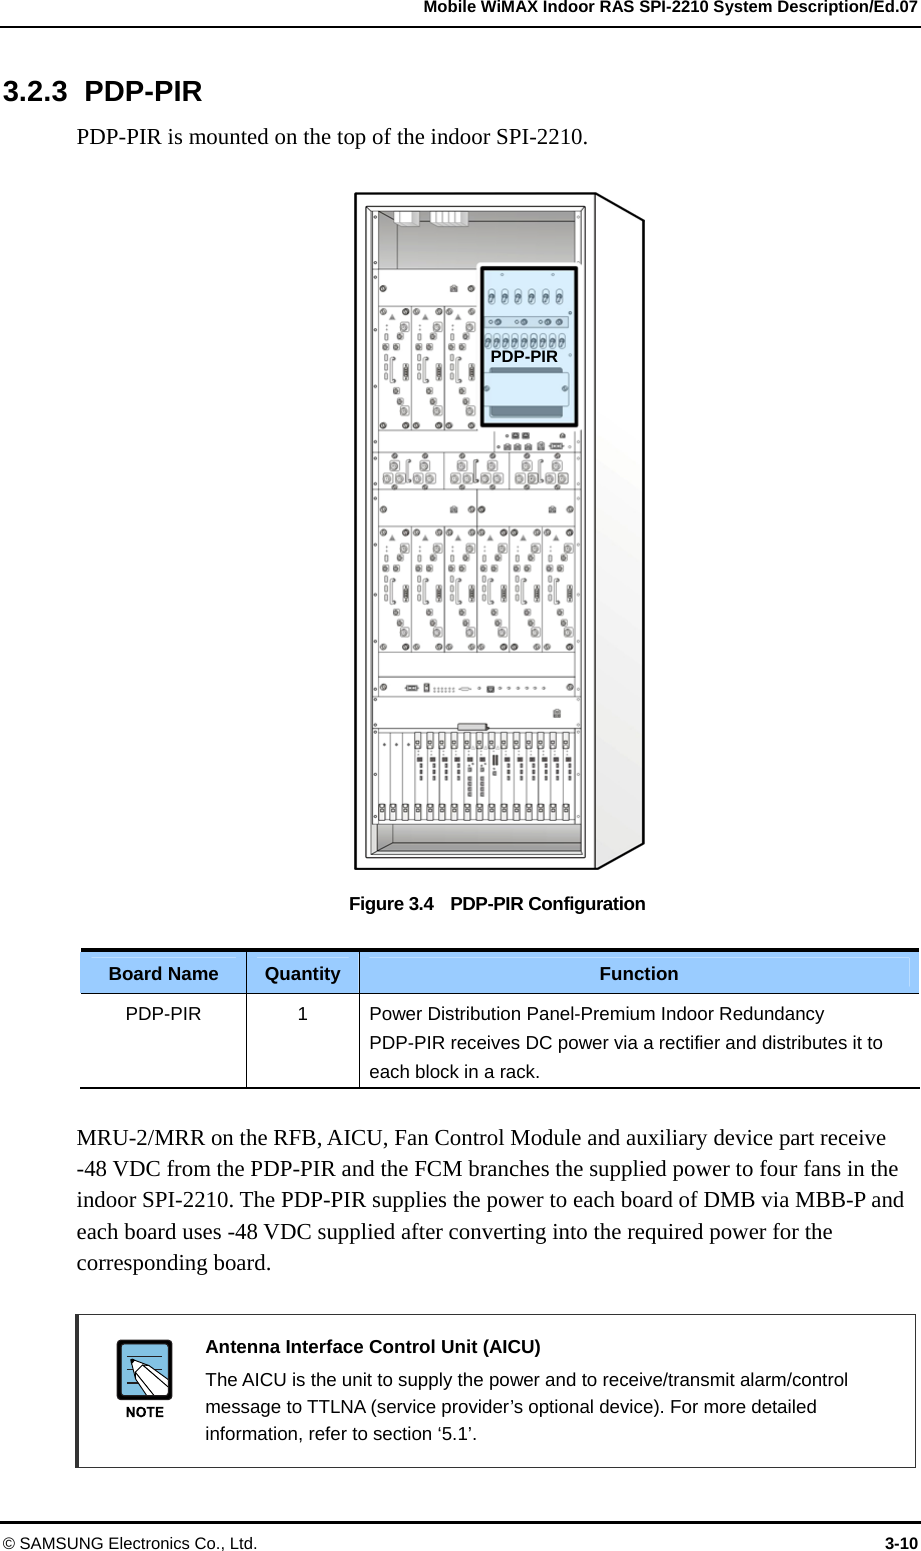   Mobile WiMAX Indoor RAS SPI-2210 System Description/Ed.07 © SAMSUNG Electronics Co., Ltd.  3-10 3.2.3 PDP-PIR PDP-PIR is mounted on the top of the indoor SPI-2210.  Figure 3.4    PDP-PIR Configuration  Board Name  Quantity  Function PDP-PIR 1  Power Distribution Panel-Premium Indoor Redundancy PDP-PIR receives DC power via a rectifier and distributes it to each block in a rack.  MRU-2/MRR on the RFB, AICU, Fan Control Module and auxiliary device part receive   -48 VDC from the PDP-PIR and the FCM branches the supplied power to four fans in the indoor SPI-2210. The PDP-PIR supplies the power to each board of DMB via MBB-P and each board uses -48 VDC supplied after converting into the required power for the corresponding board.    Antenna Interface Control Unit (AICU)   The AICU is the unit to supply the power and to receive/transmit alarm/control message to TTLNA (service provider’s optional device). For more detailed information, refer to section ‘5.1’. PDP-PIR 